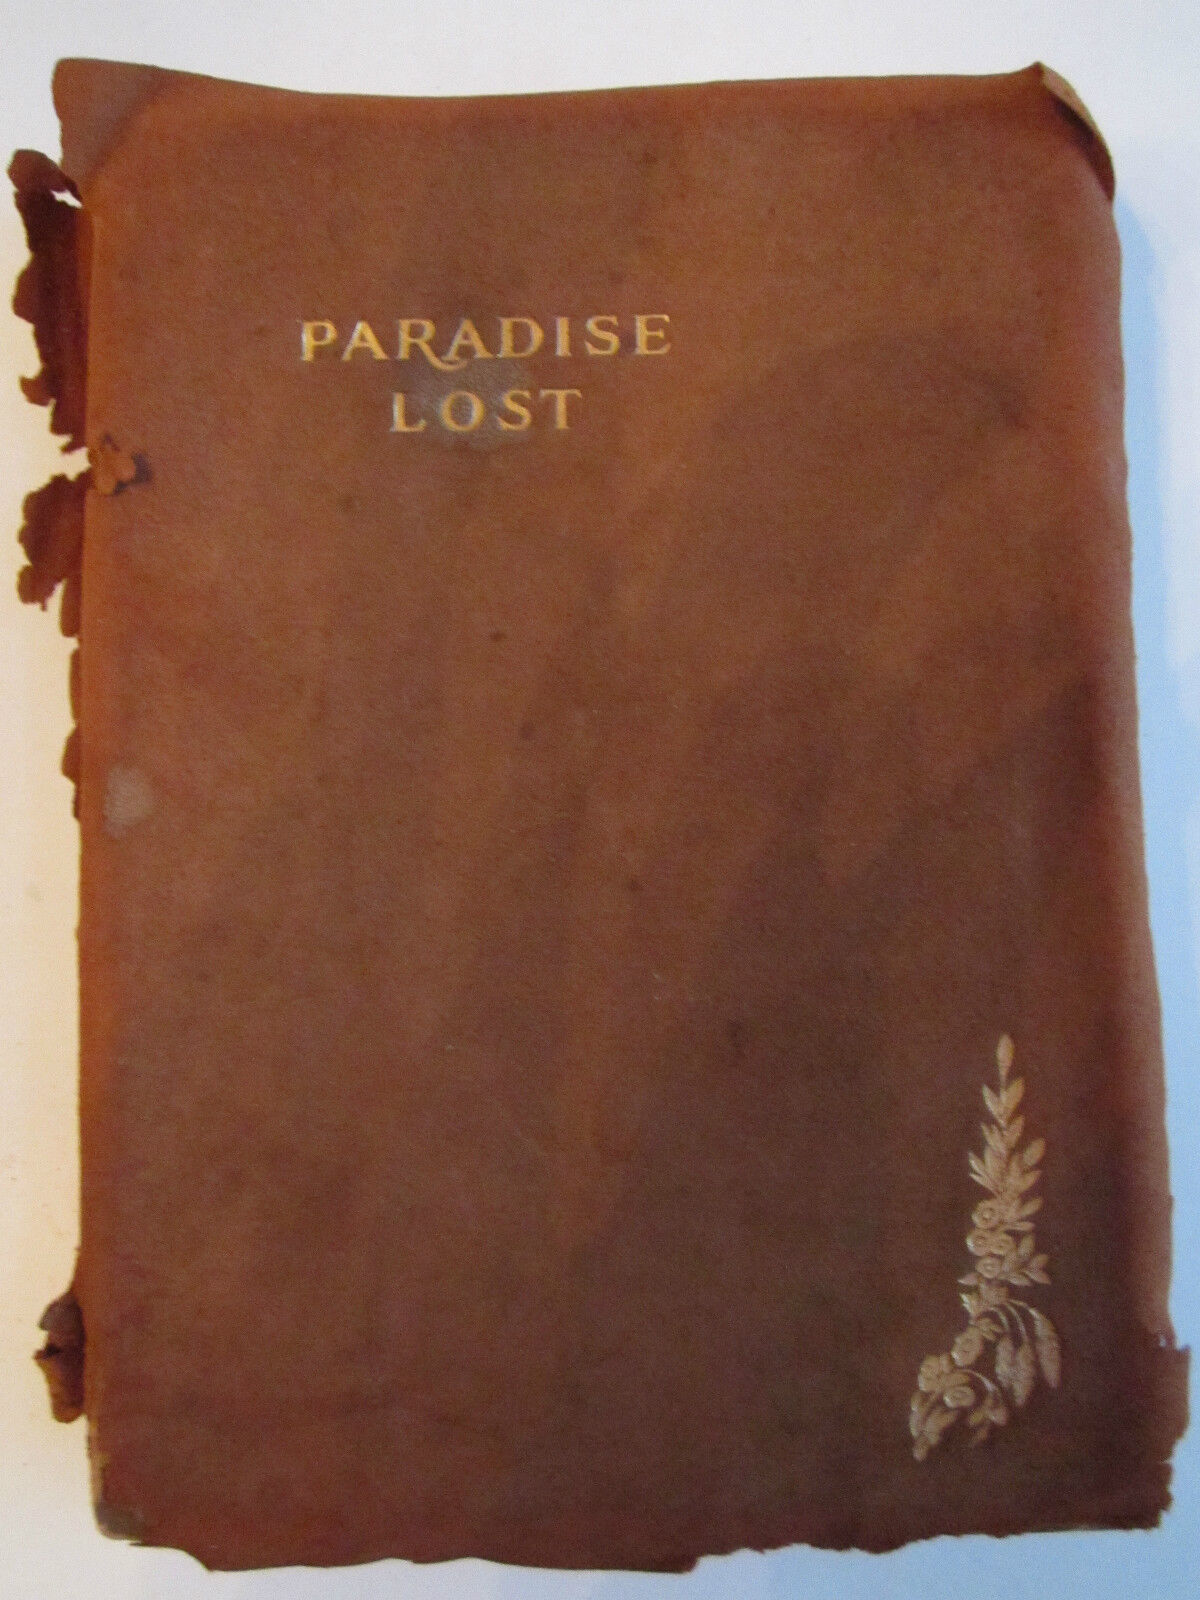 VINTAGE PARADISE LOST BY JOHN MILTON BOOK - VERY OLD  - TUB RRR